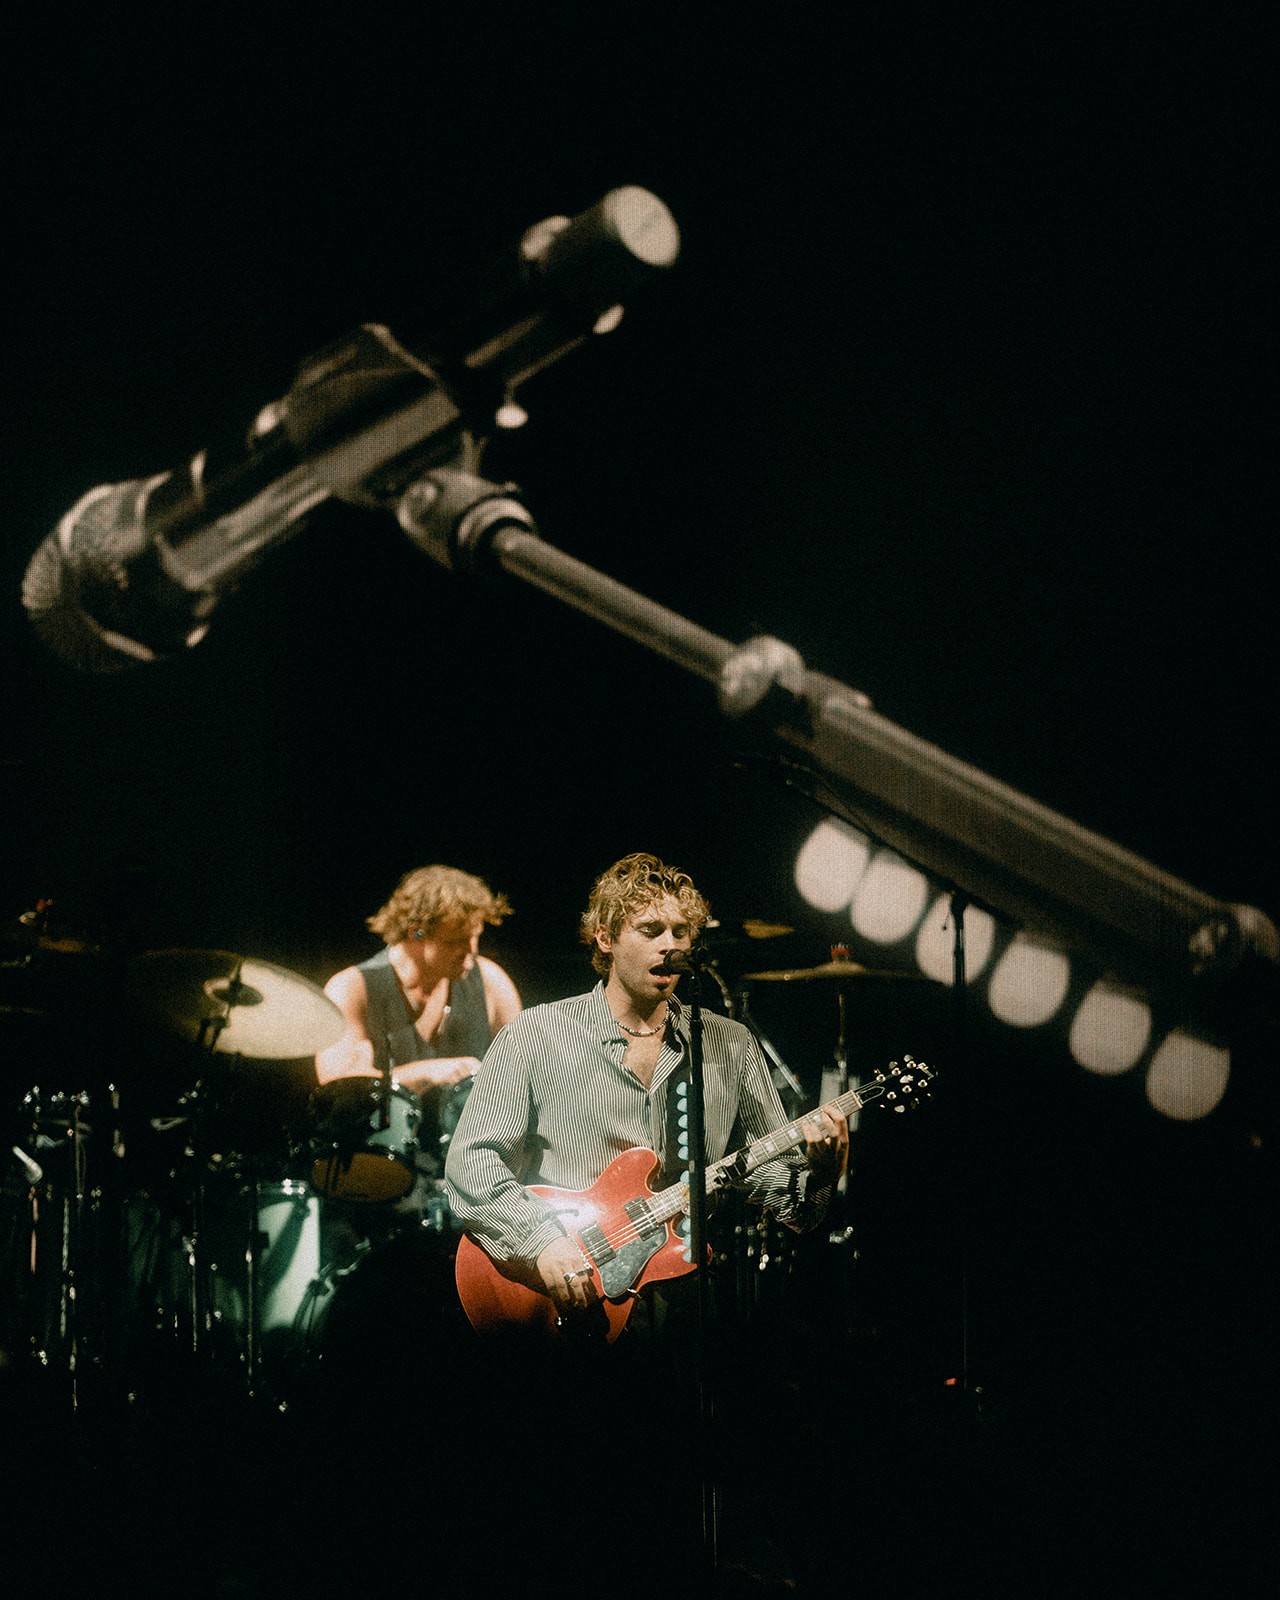 Everything We Saw at the 5 Seconds of Summer Show at The Andrew J Brady Music Center